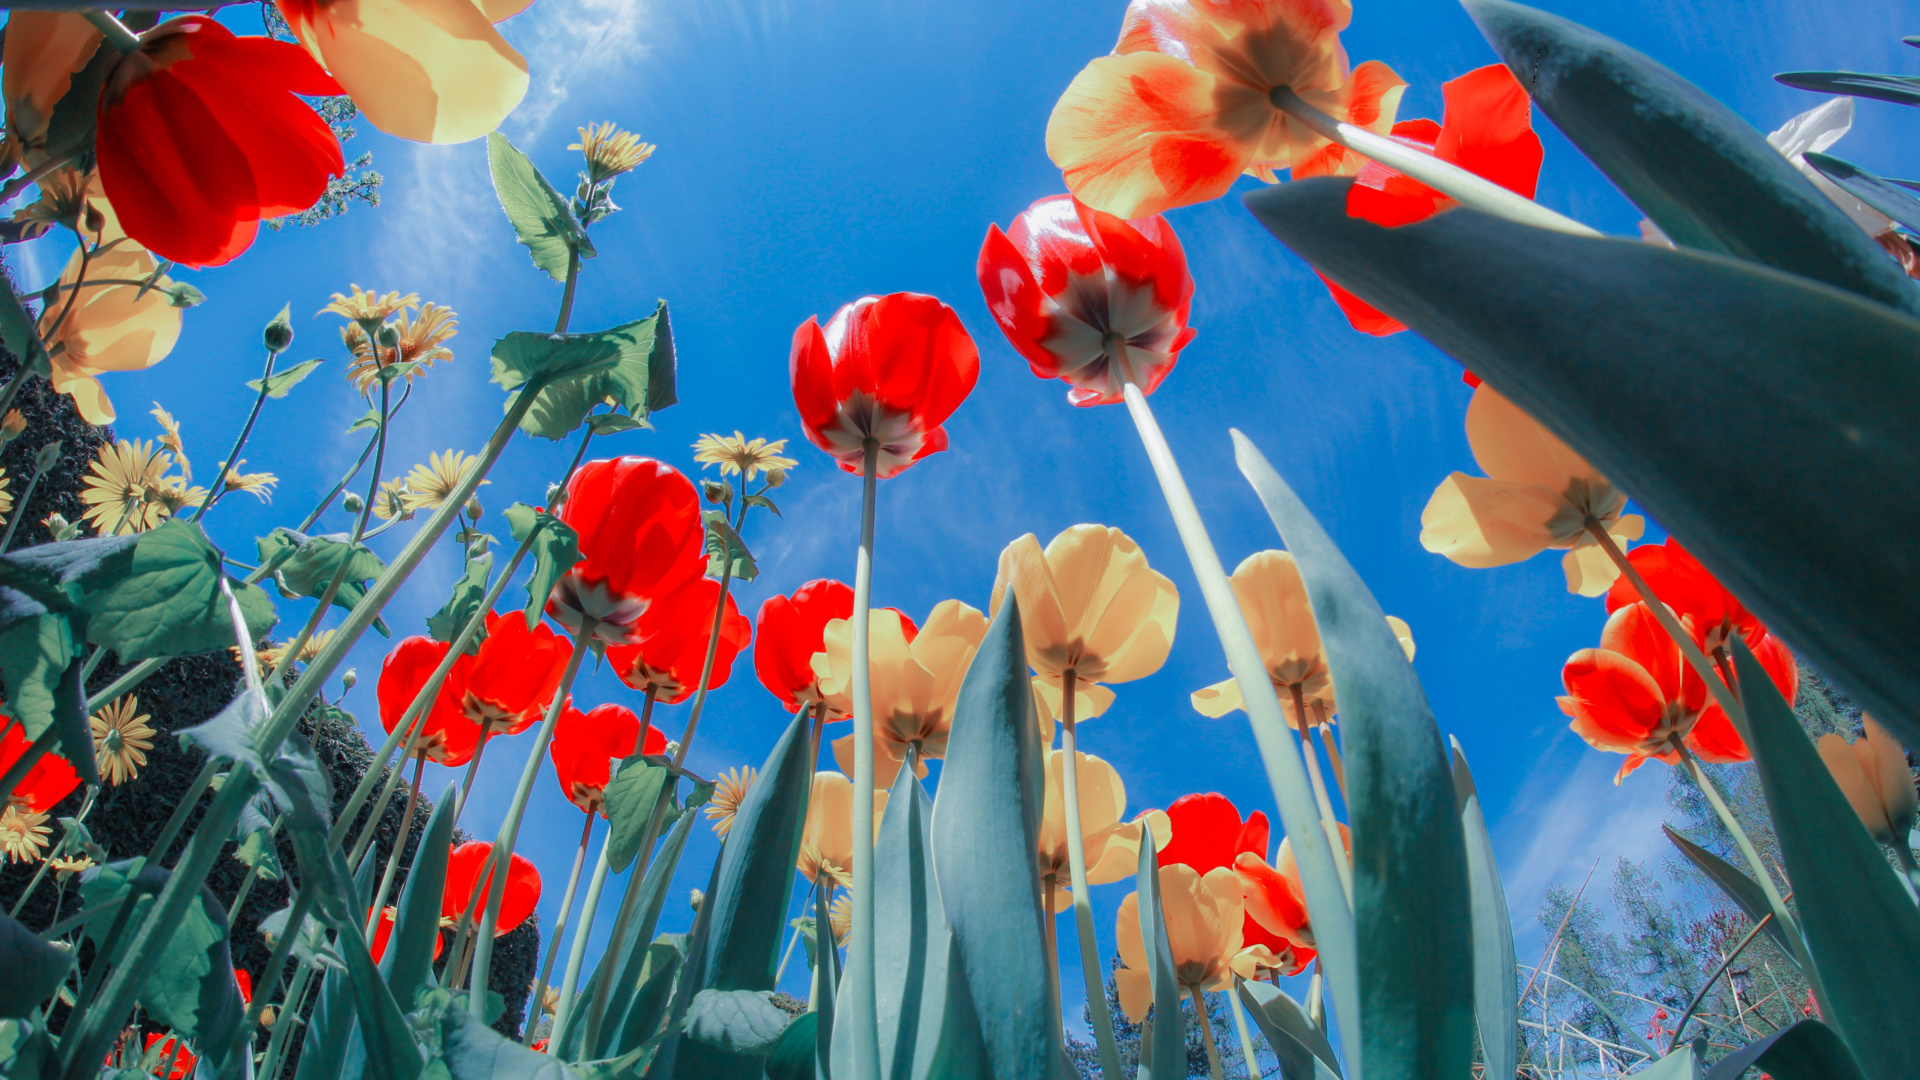 Poppies Sunny Day wallpaper 1920x1080